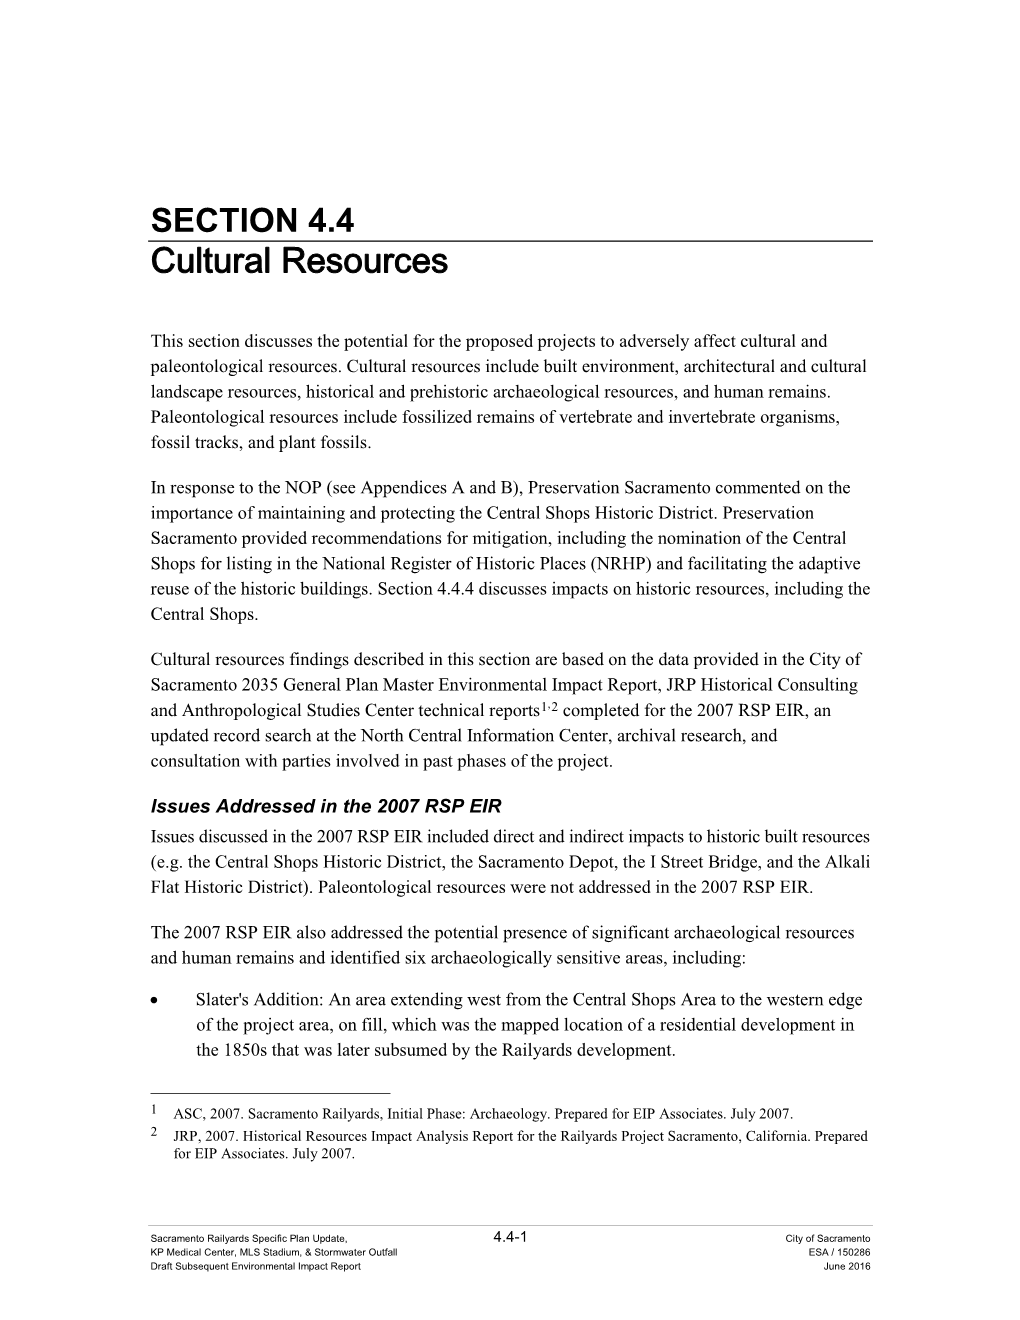 SECTION 4.4 Cultural Resources